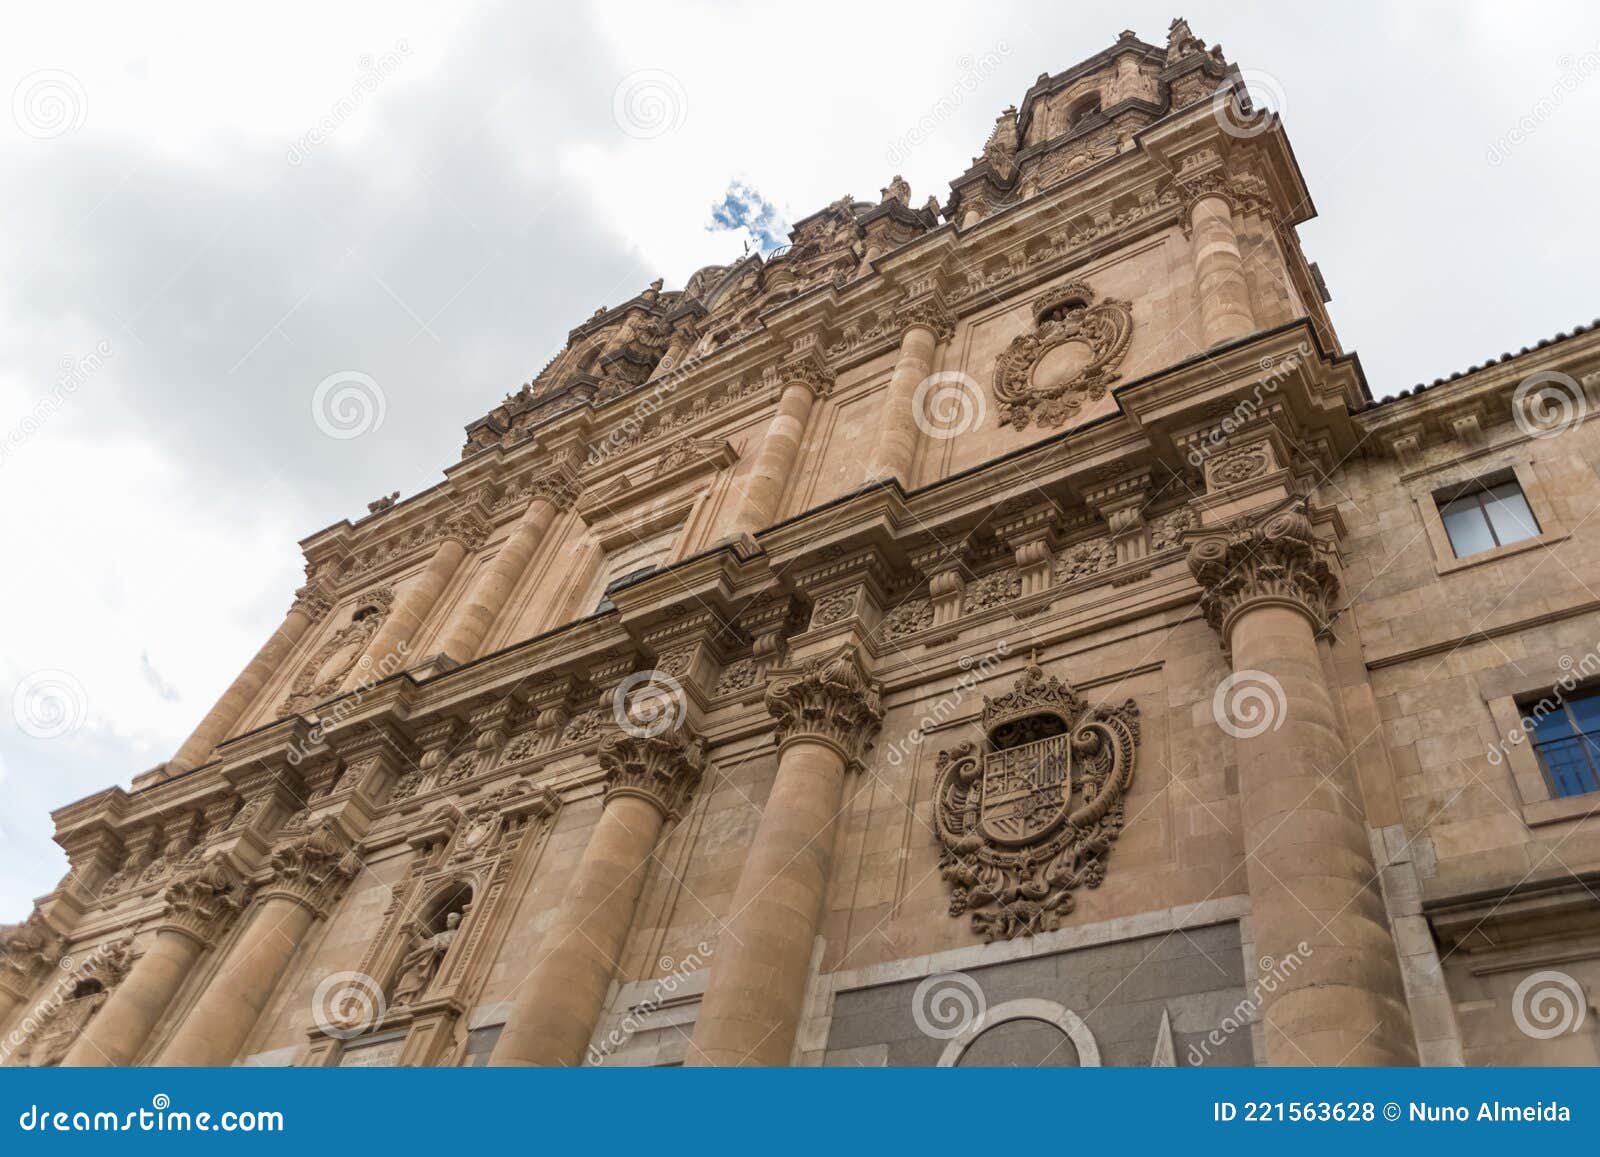 view at the baroque iconic facade at the la clerecÃÂ­a building, pontifical university at salamanca, universidad pontificia de